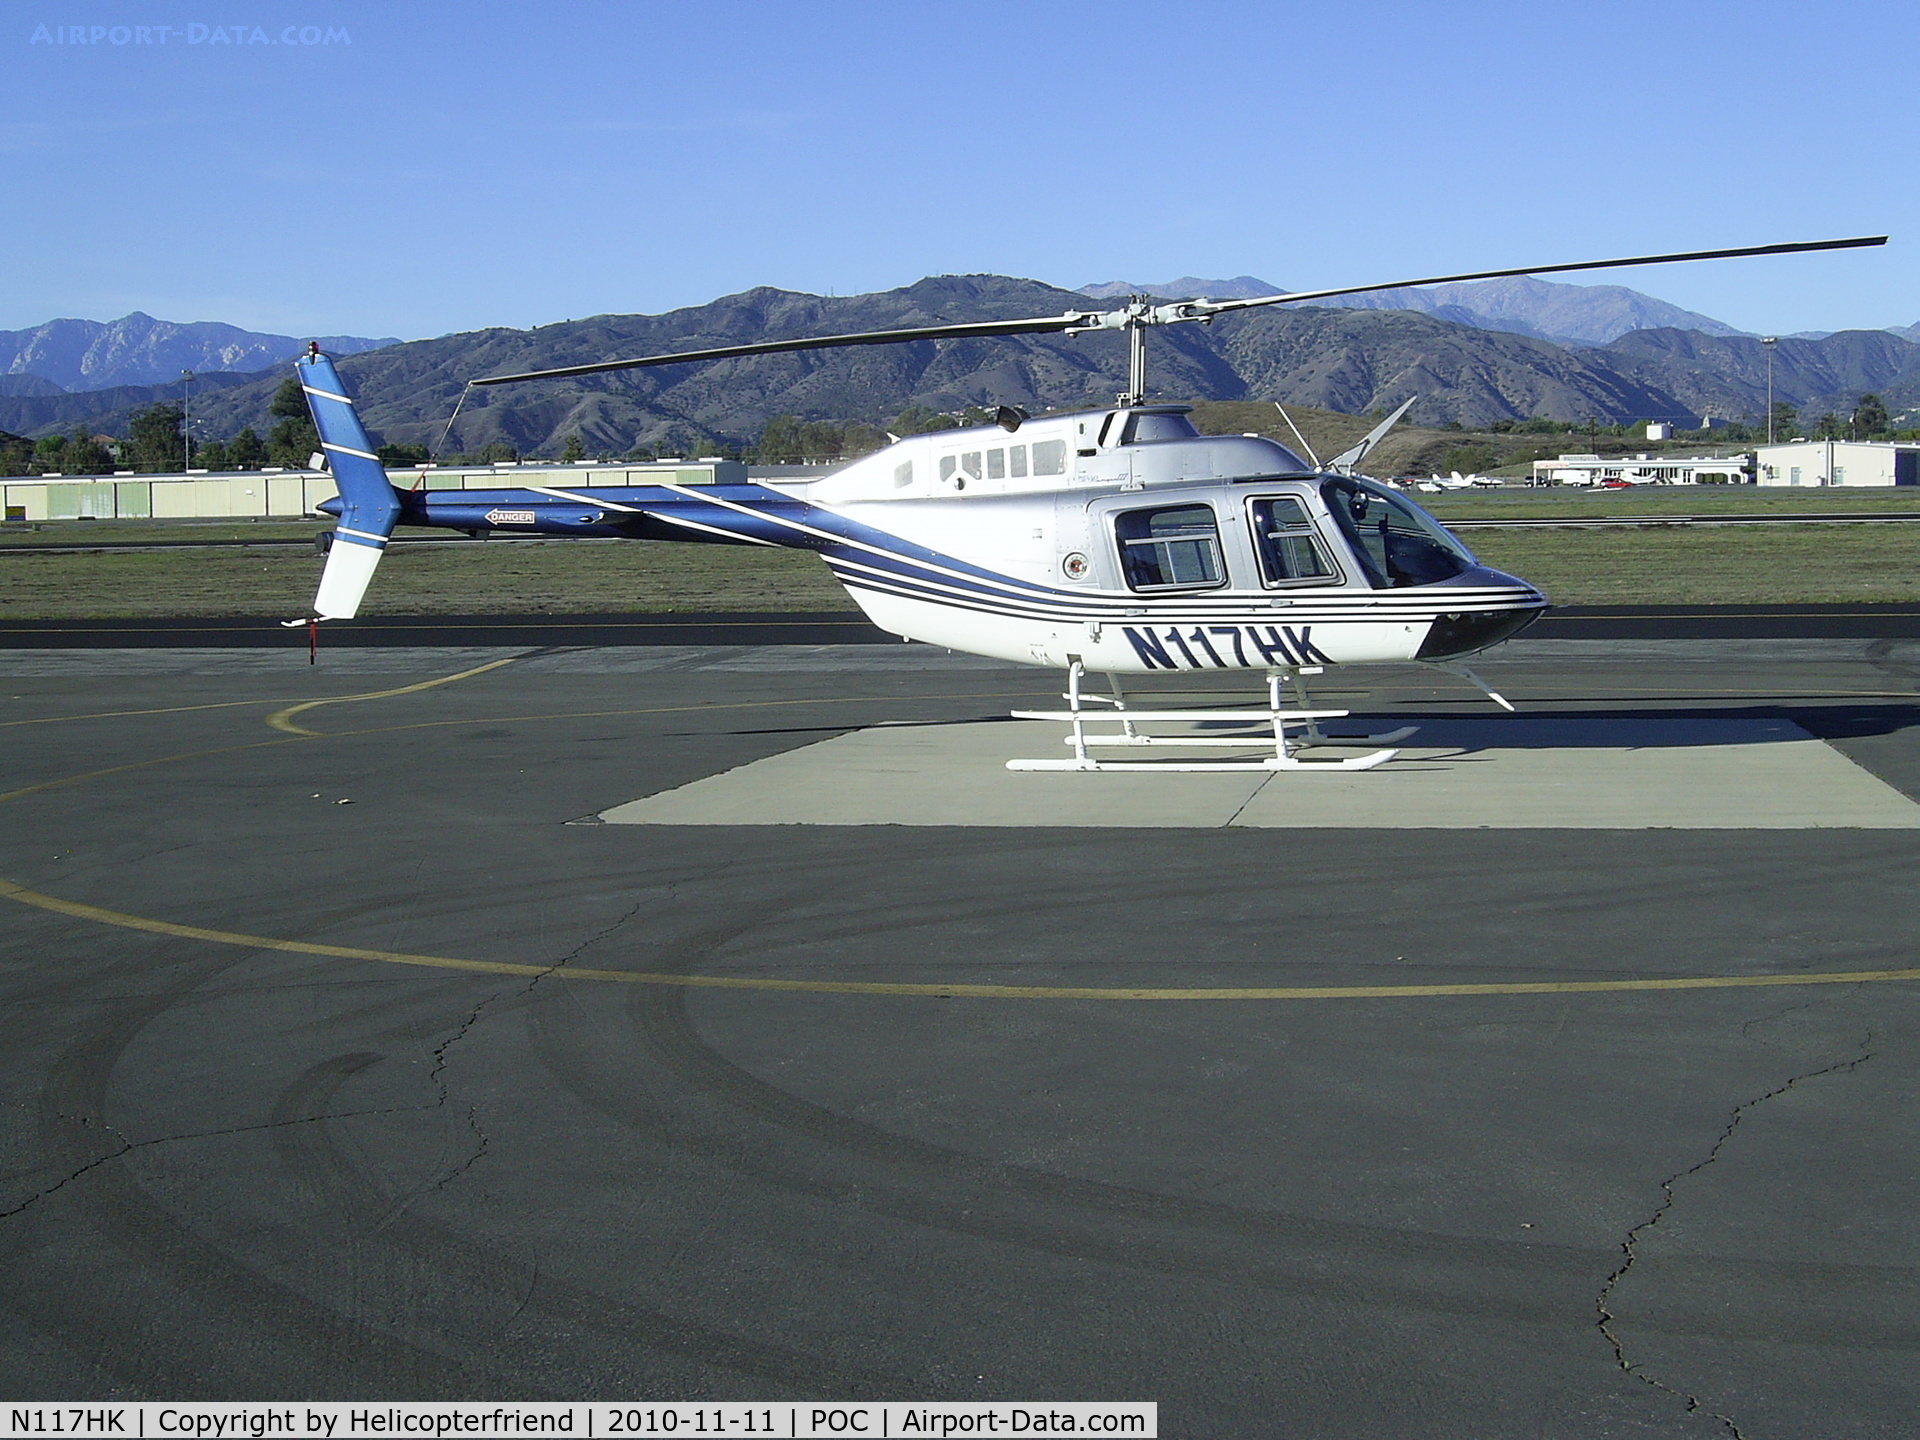 N117HK, 1997 Bell 206B JetRanger III C/N 4462, Parked at west helipad and visiting the drag races at LACO Fairplex